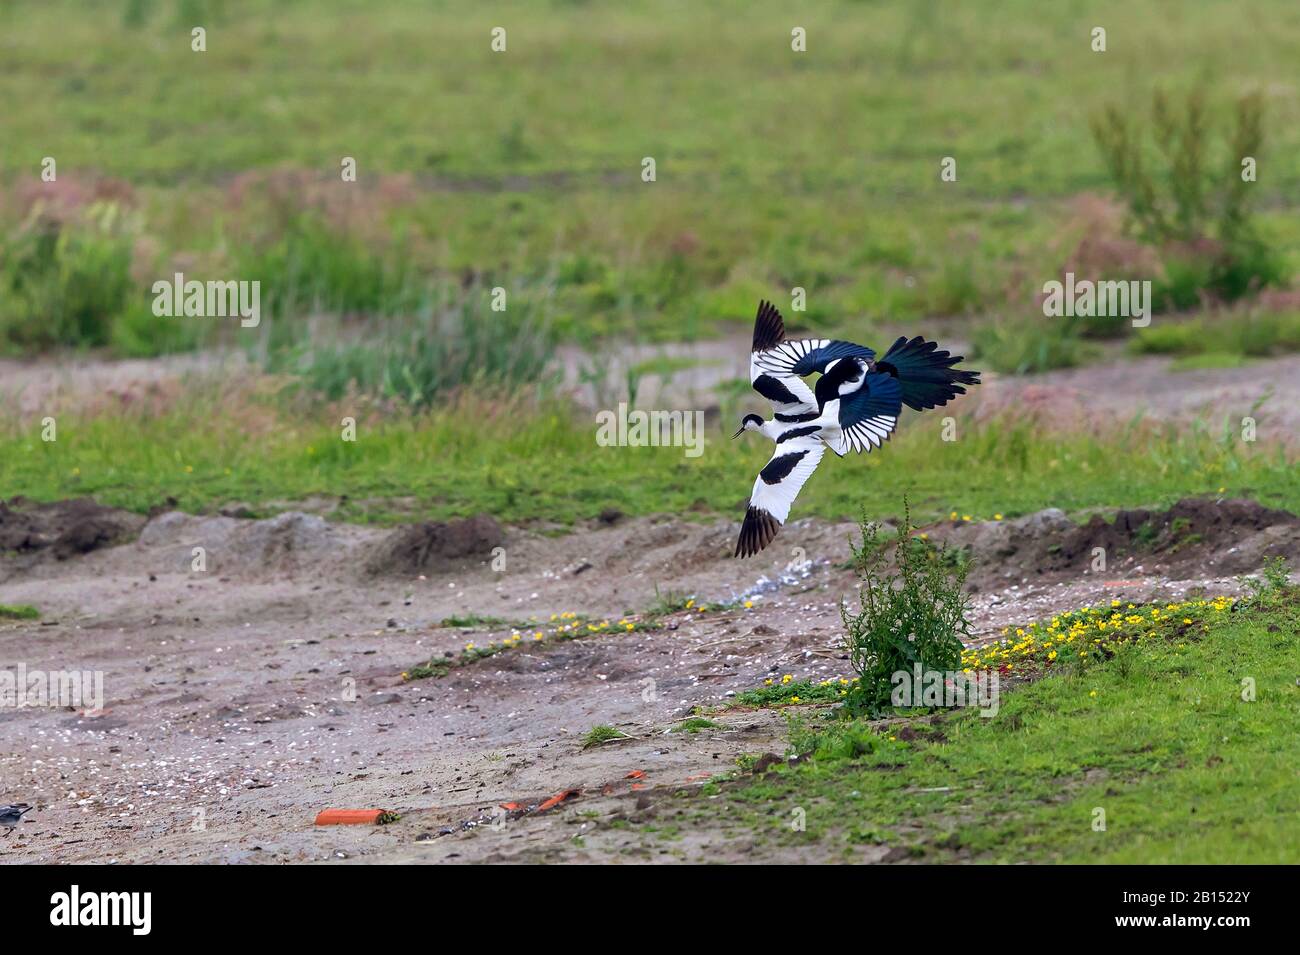 black-billed magpie (Pica pica), hunting an avocet chick, Netherlands, Texel, NSG Dijkmanshuizen Stock Photo